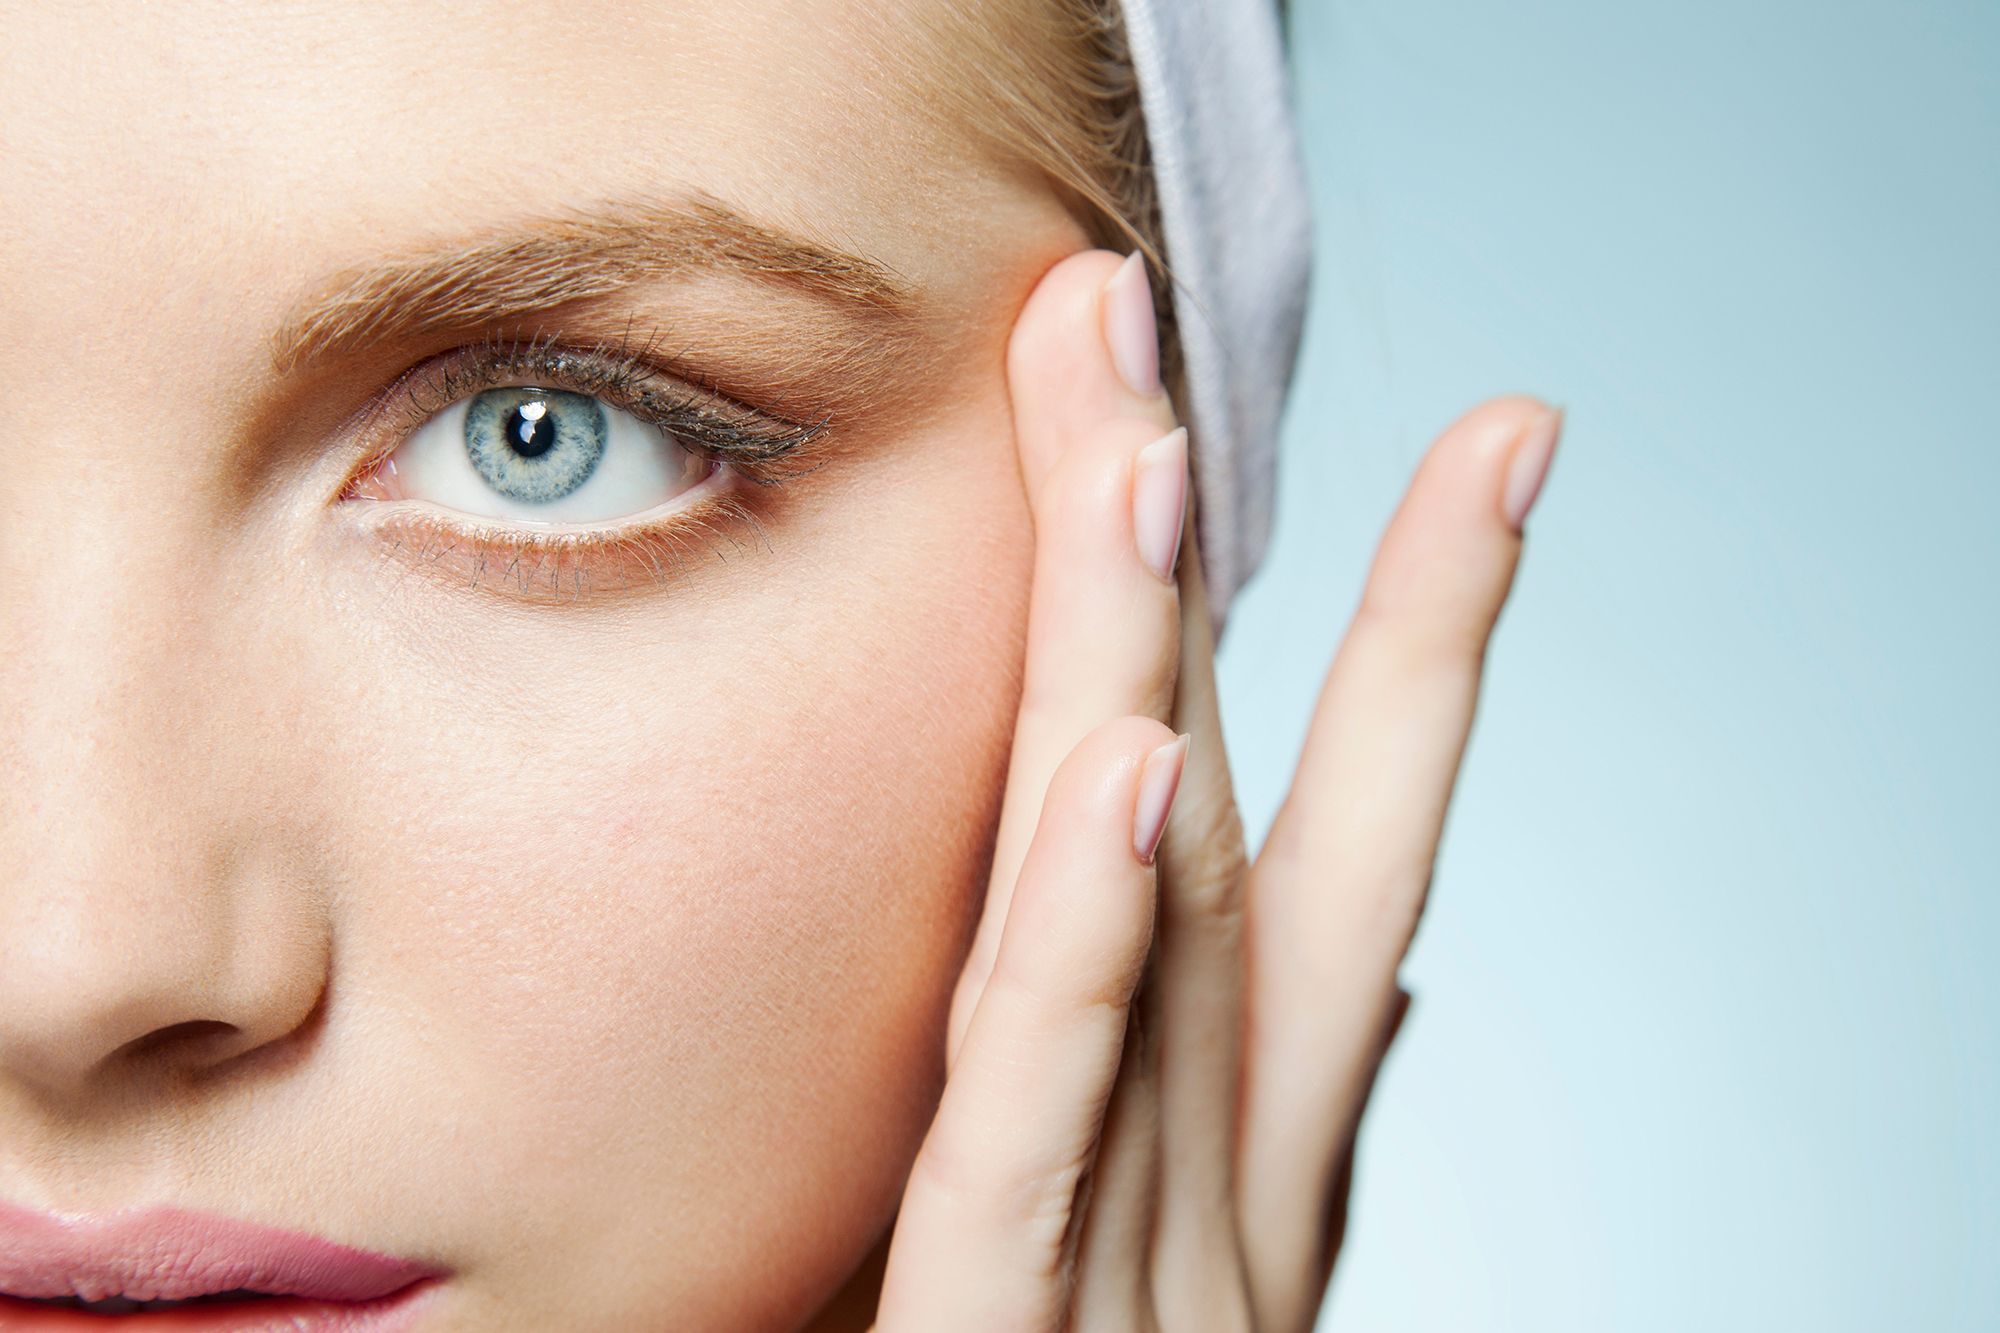 4 New Anti-Aging Treatments for Eyes - Best Anti Aging Procedures